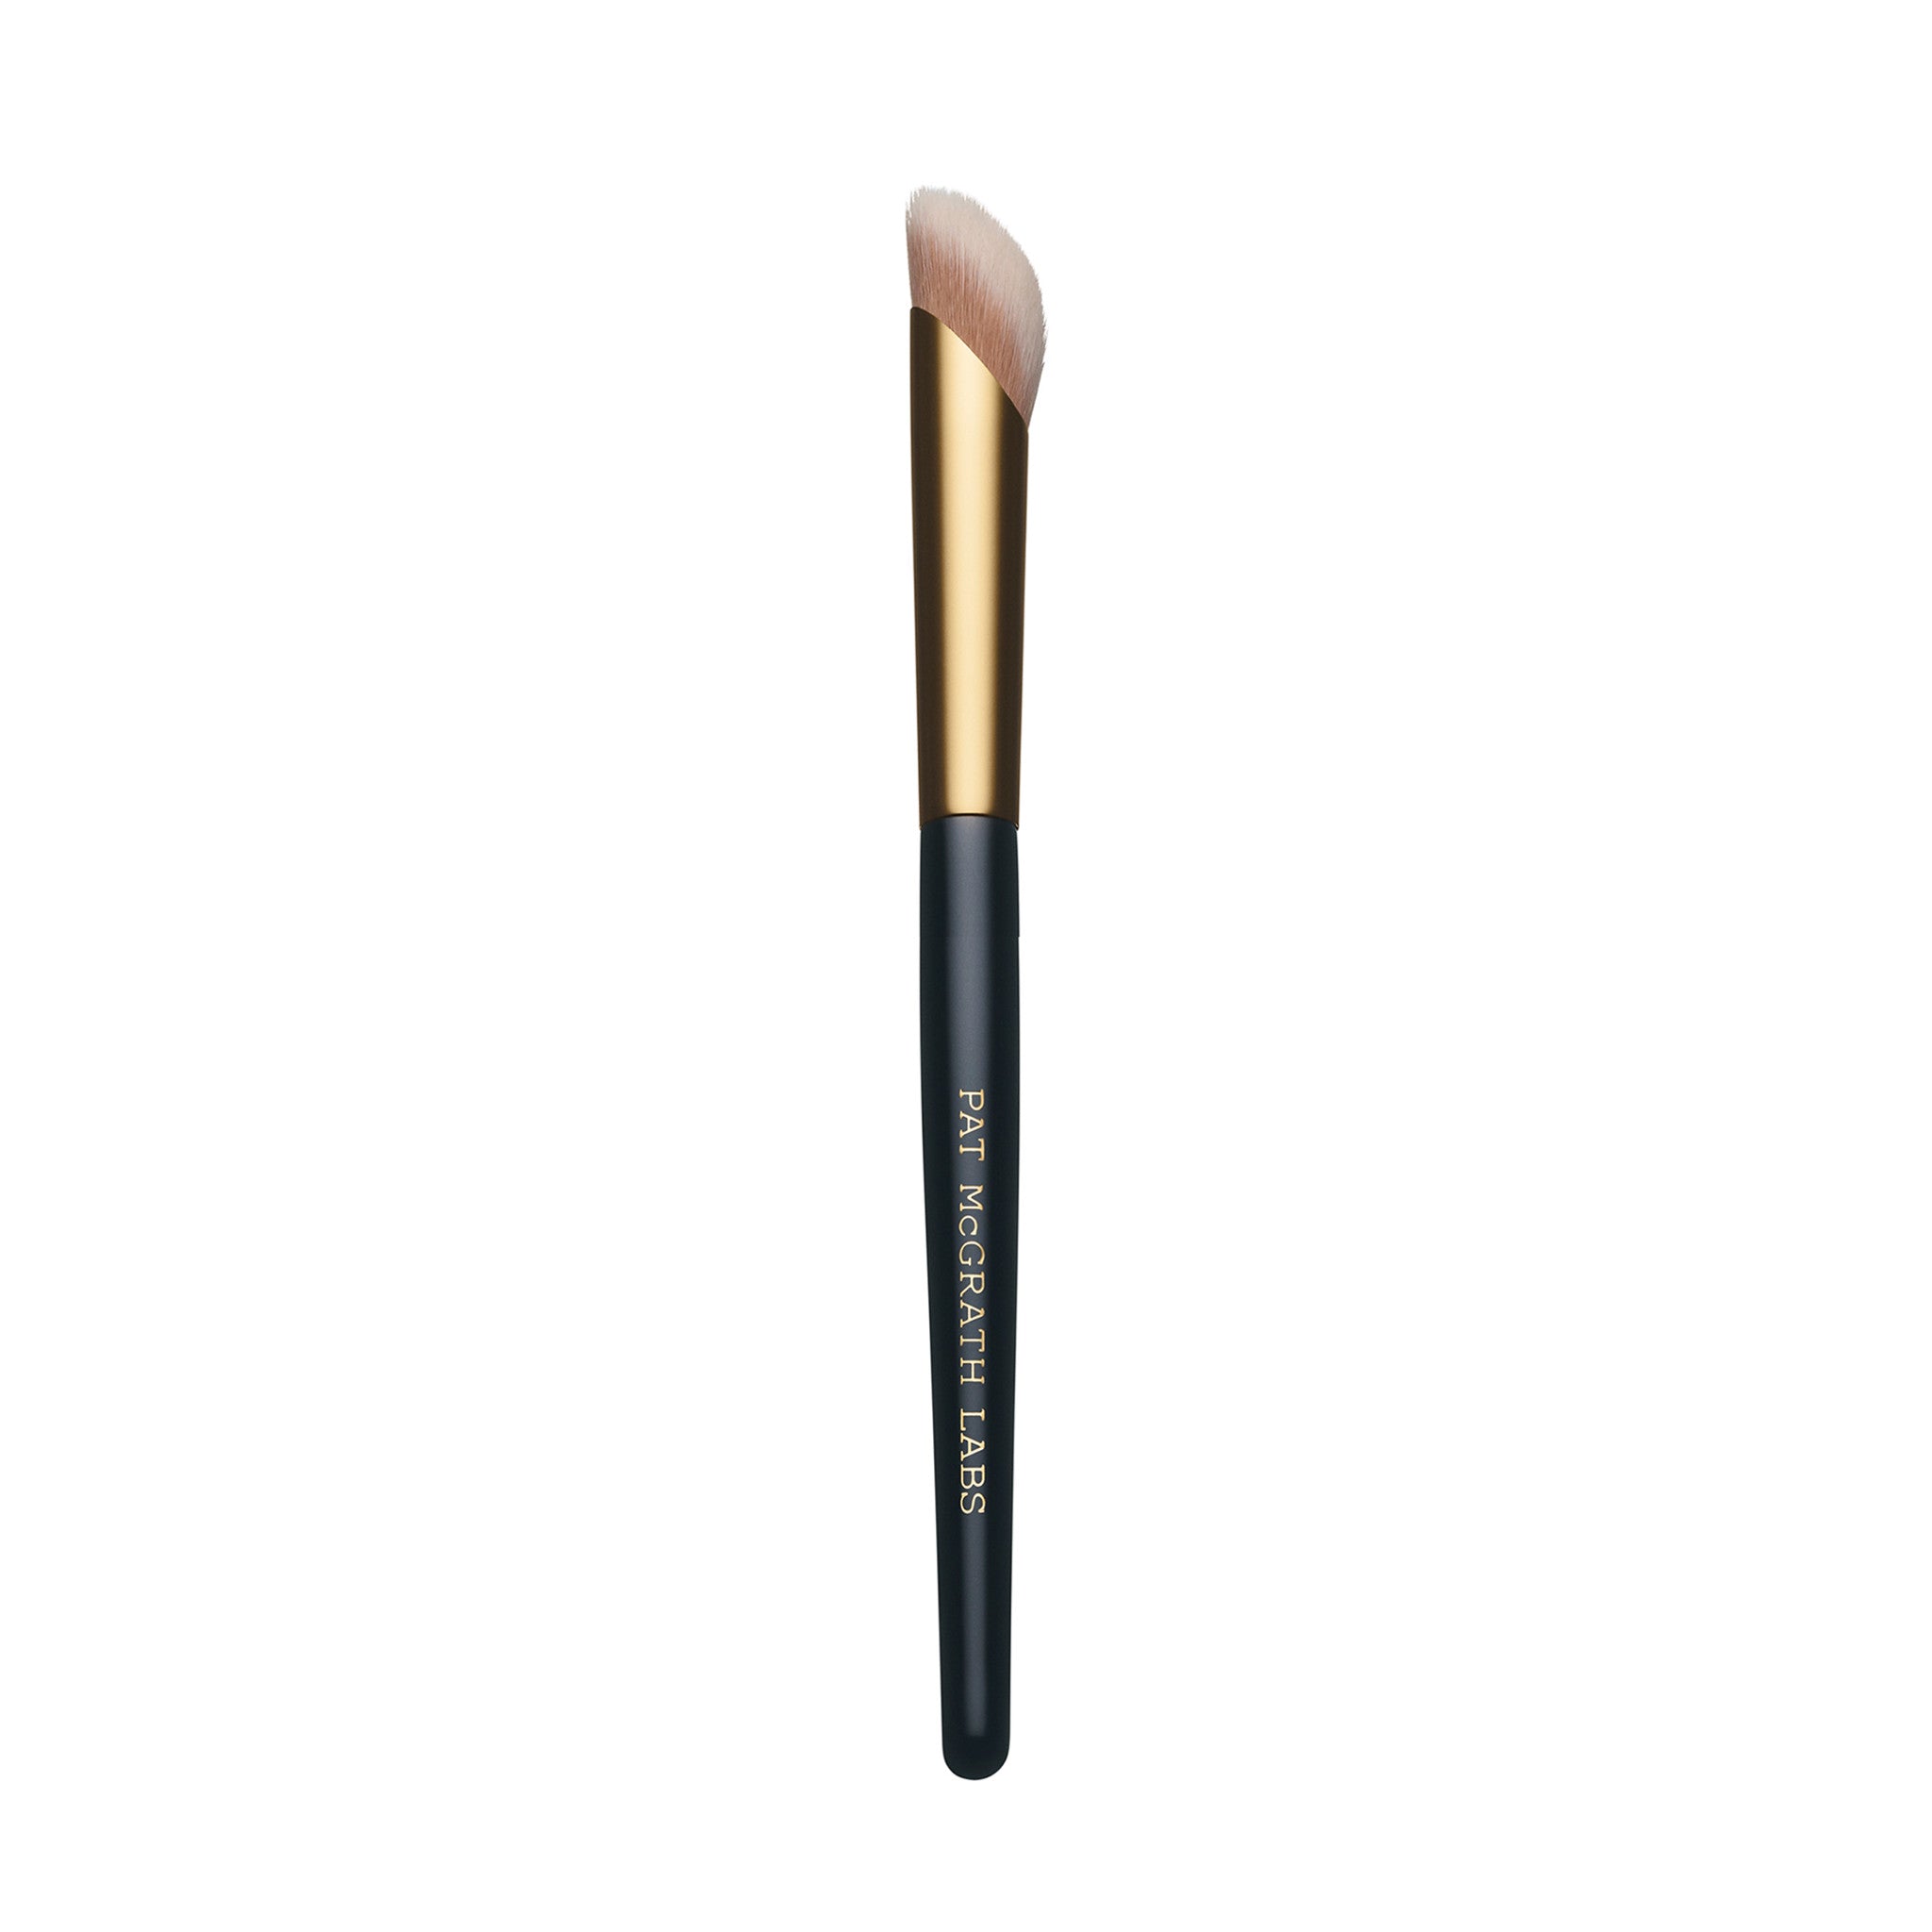 Sublime Perfection Concealer Brush main image.